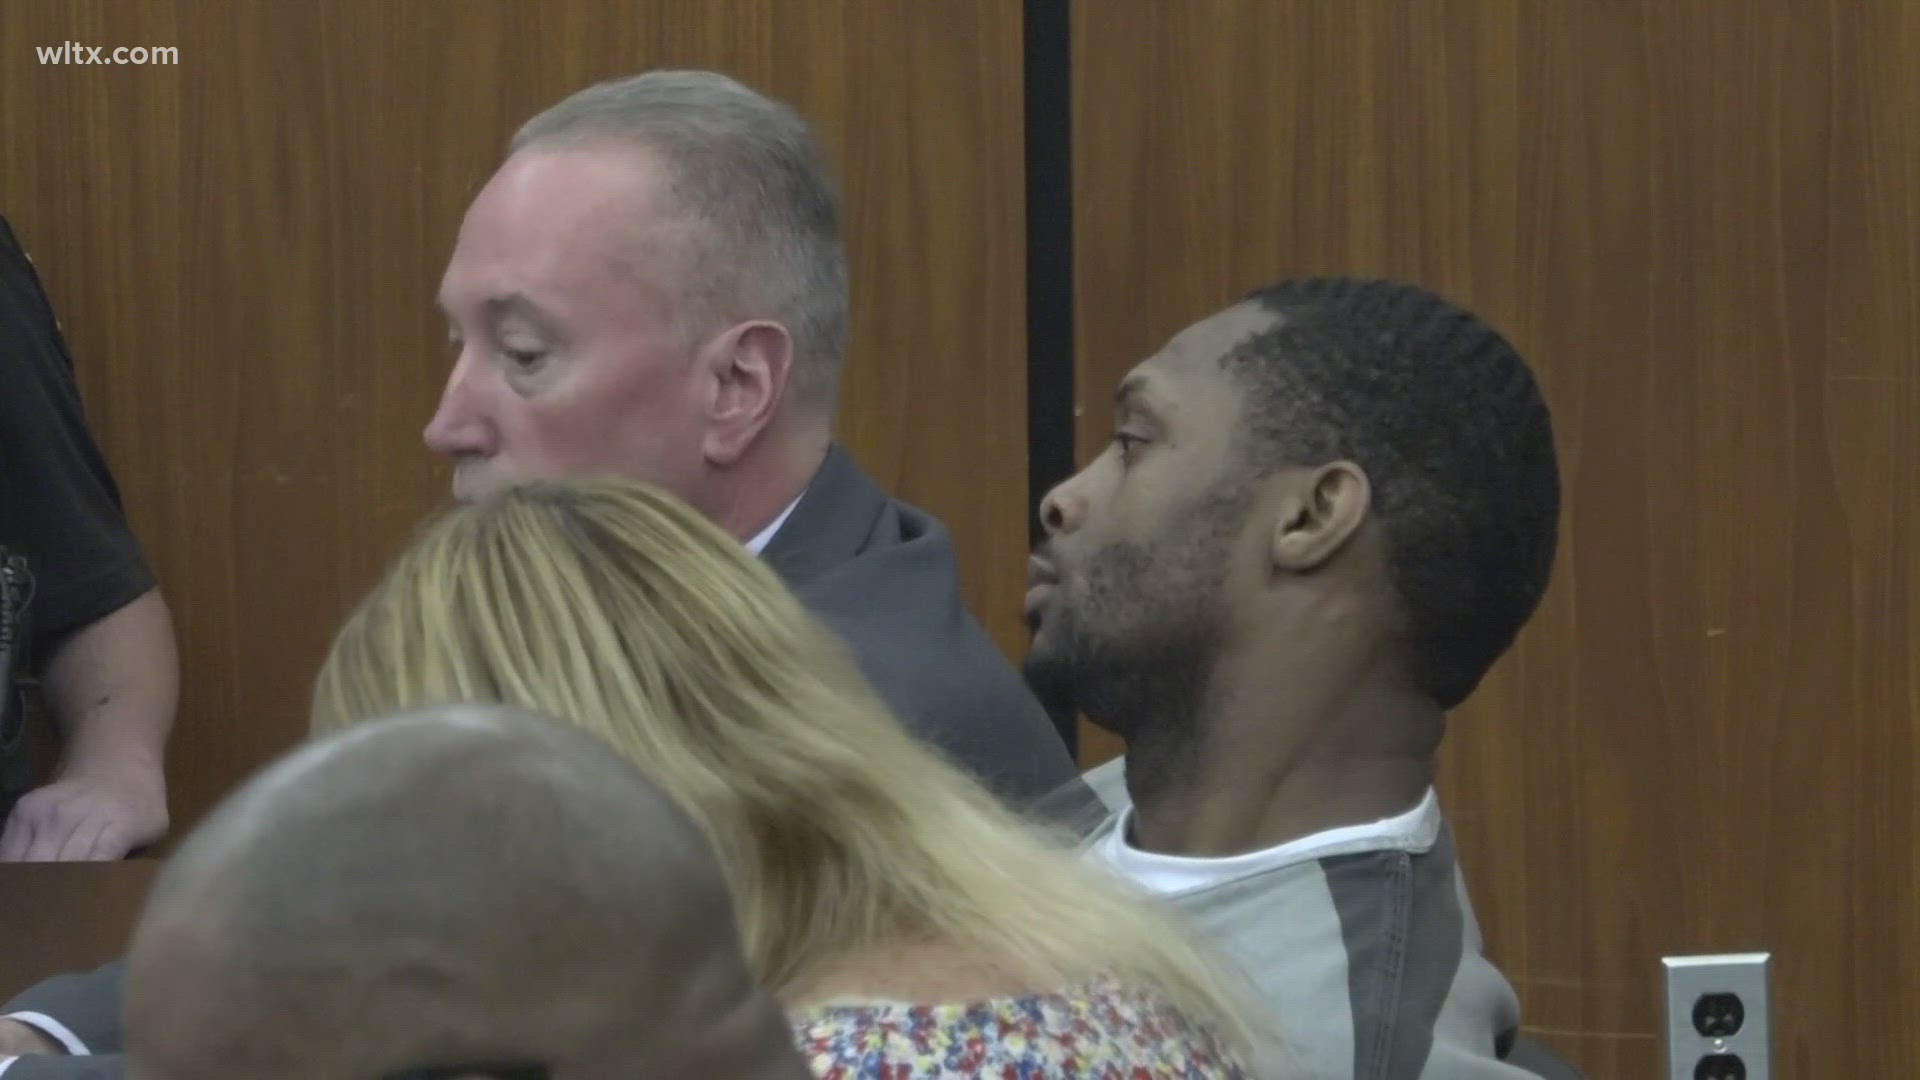 Troy Stevenson, 29, was sentenced to life in prison after a jury found him guilty of killing 62-year-old Charlie Jackson Jr.